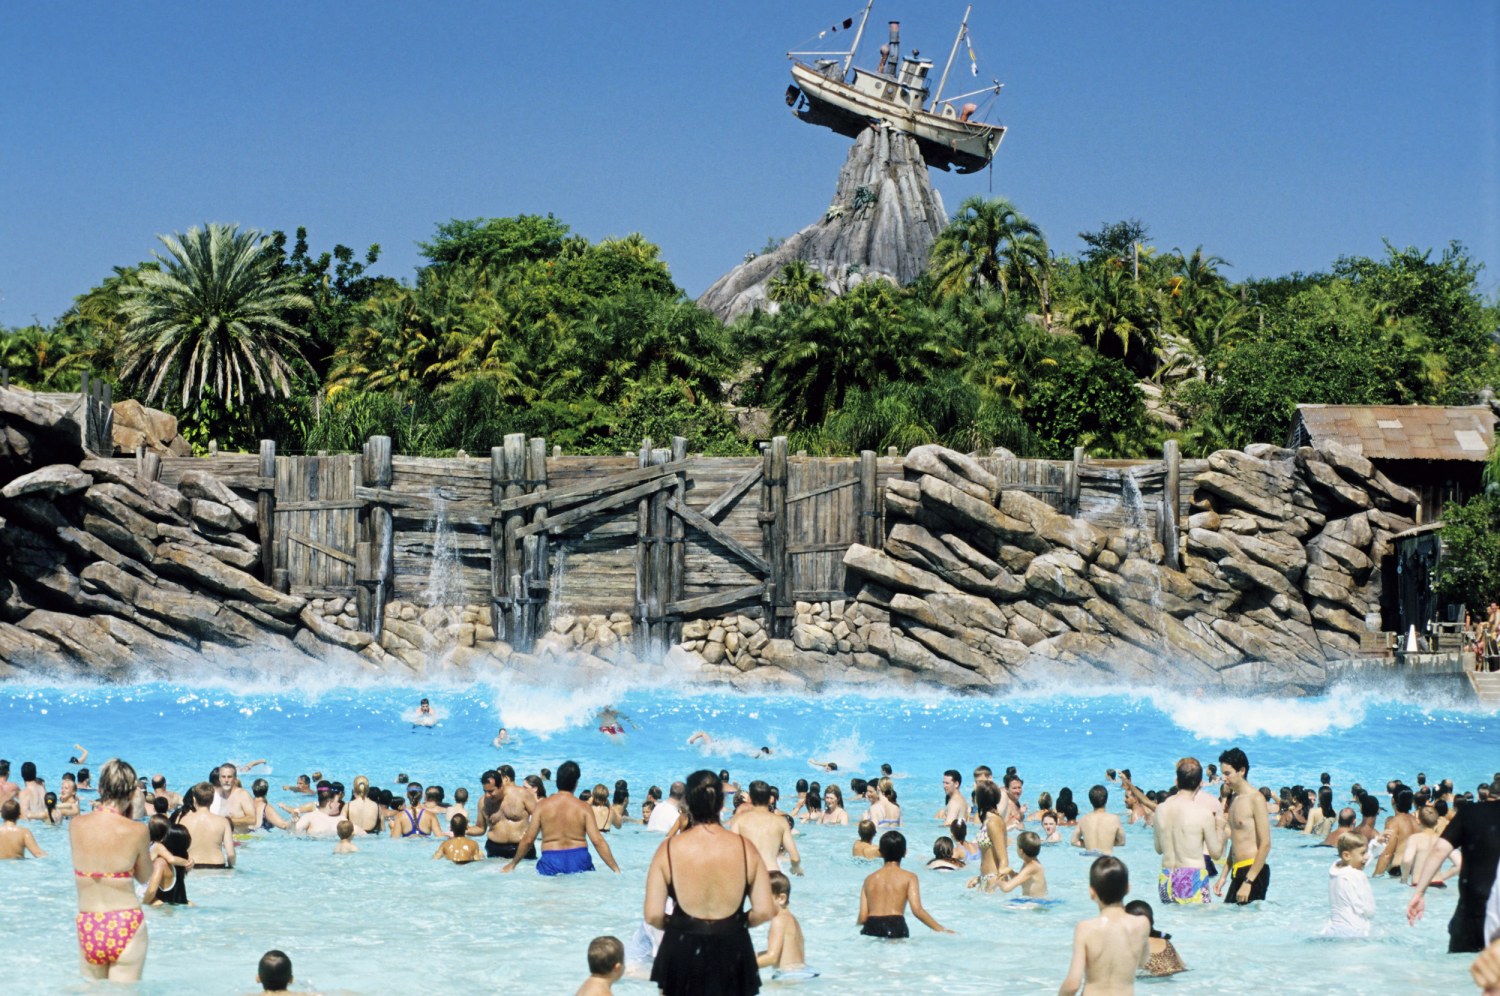 Woman Claims She Was Told To Leave Water Park Because Her Bikini